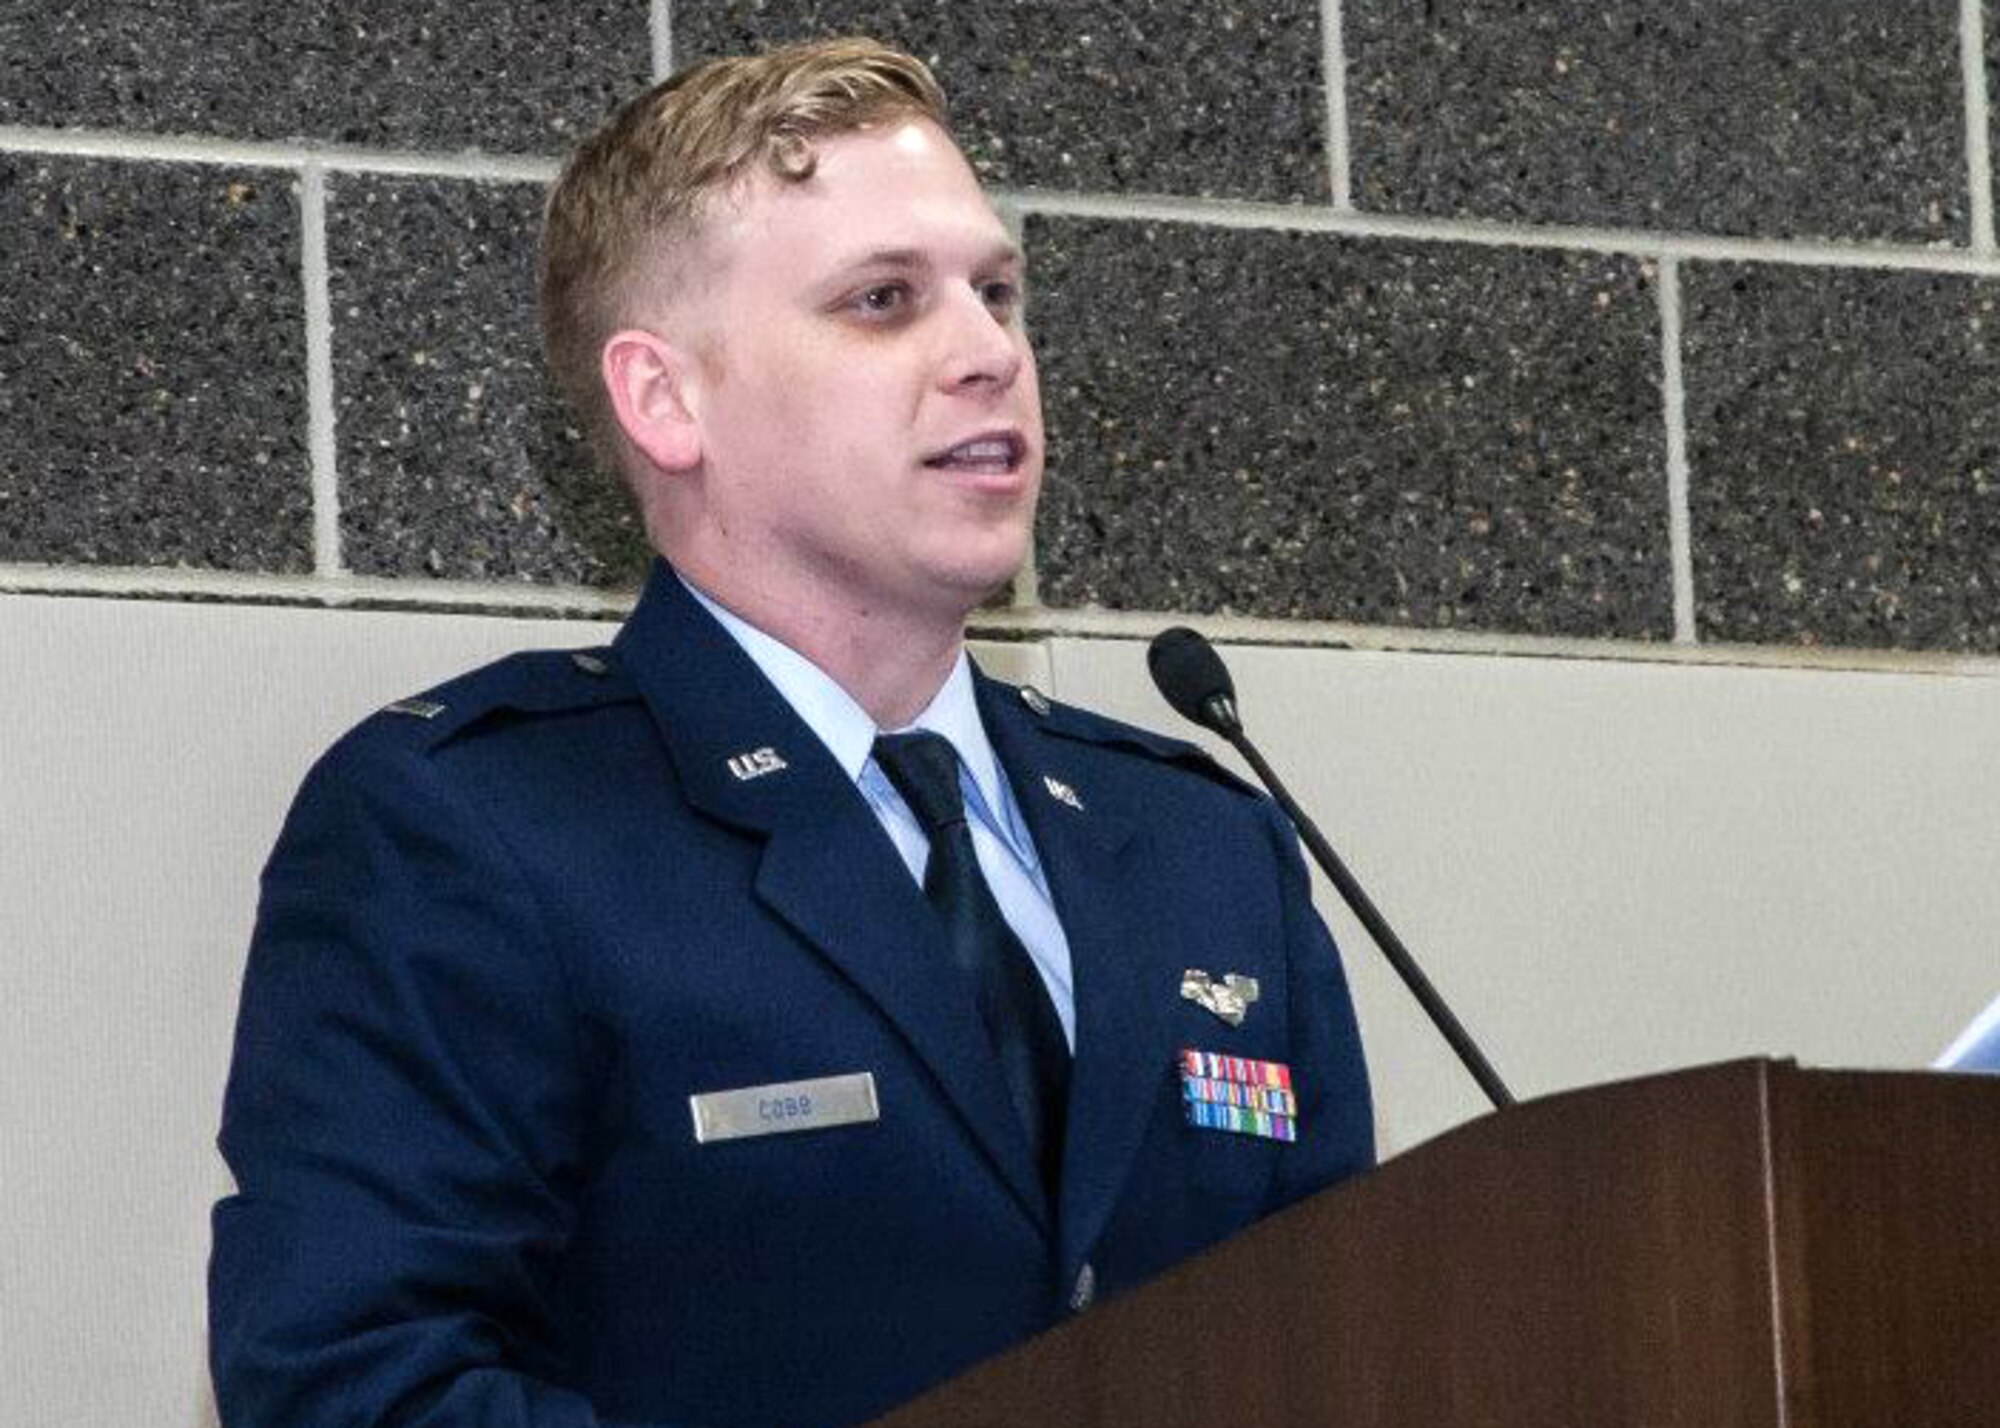 Capt. Ryan Cobb, 384th Air Refueling Squadron pilot, speaks to cadets and senior members of the Emerald City Composite Squadron during an annual awards banquet, Dec. 2015, in Wichita, Kan. Cobb has been mentoring cadets just as he was in his teens and is proud to be able to give back. (Courtesy photo) 